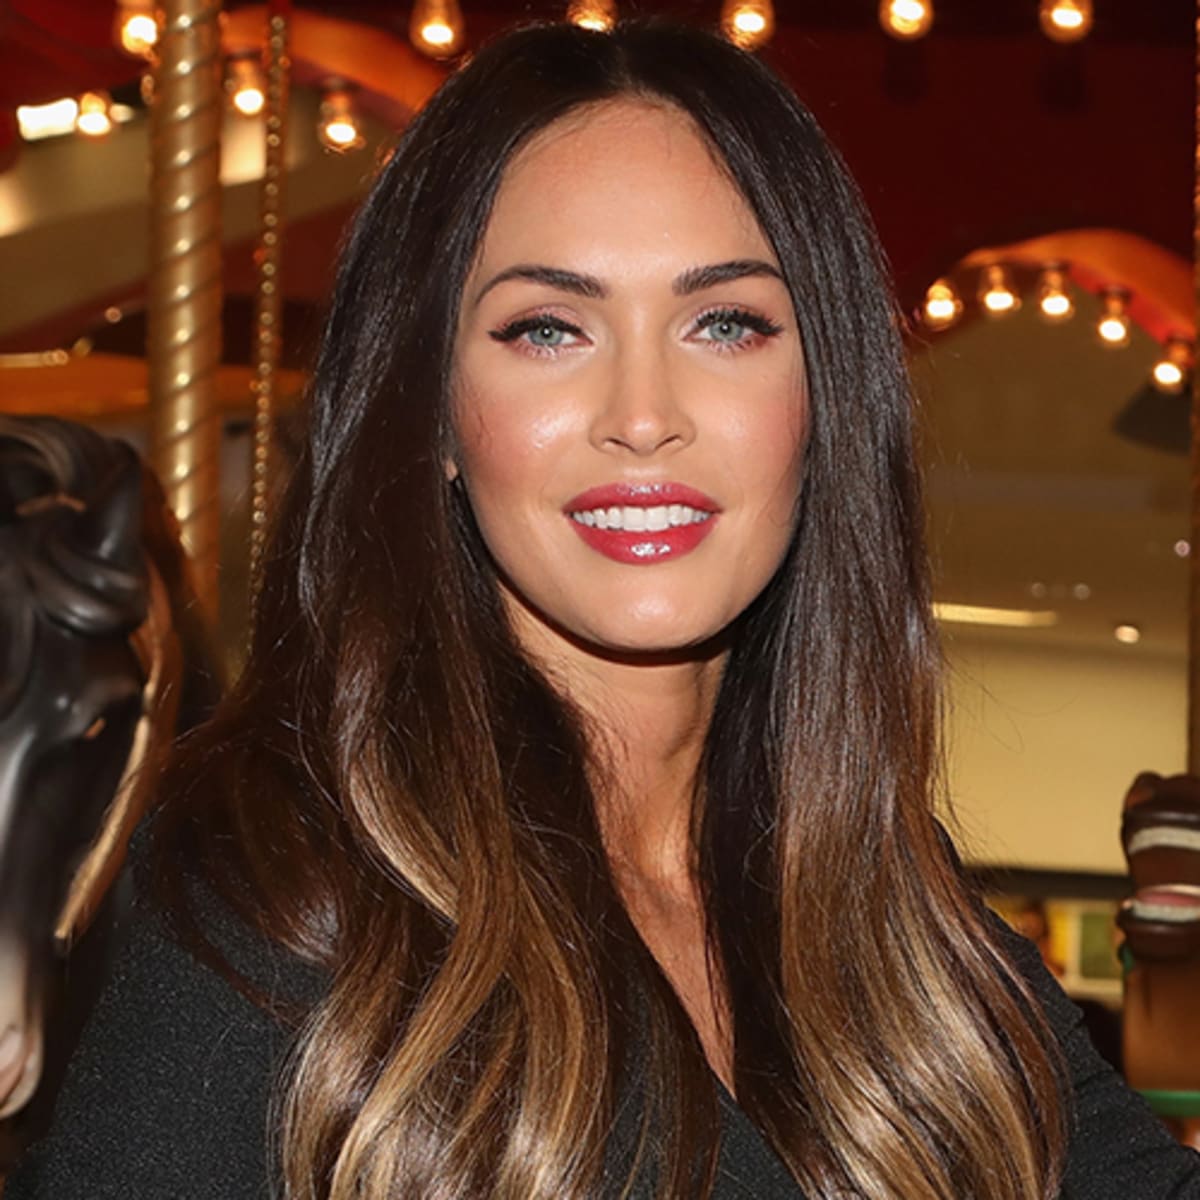 facts-about-megan-fox-that-will-shock-you.jpg